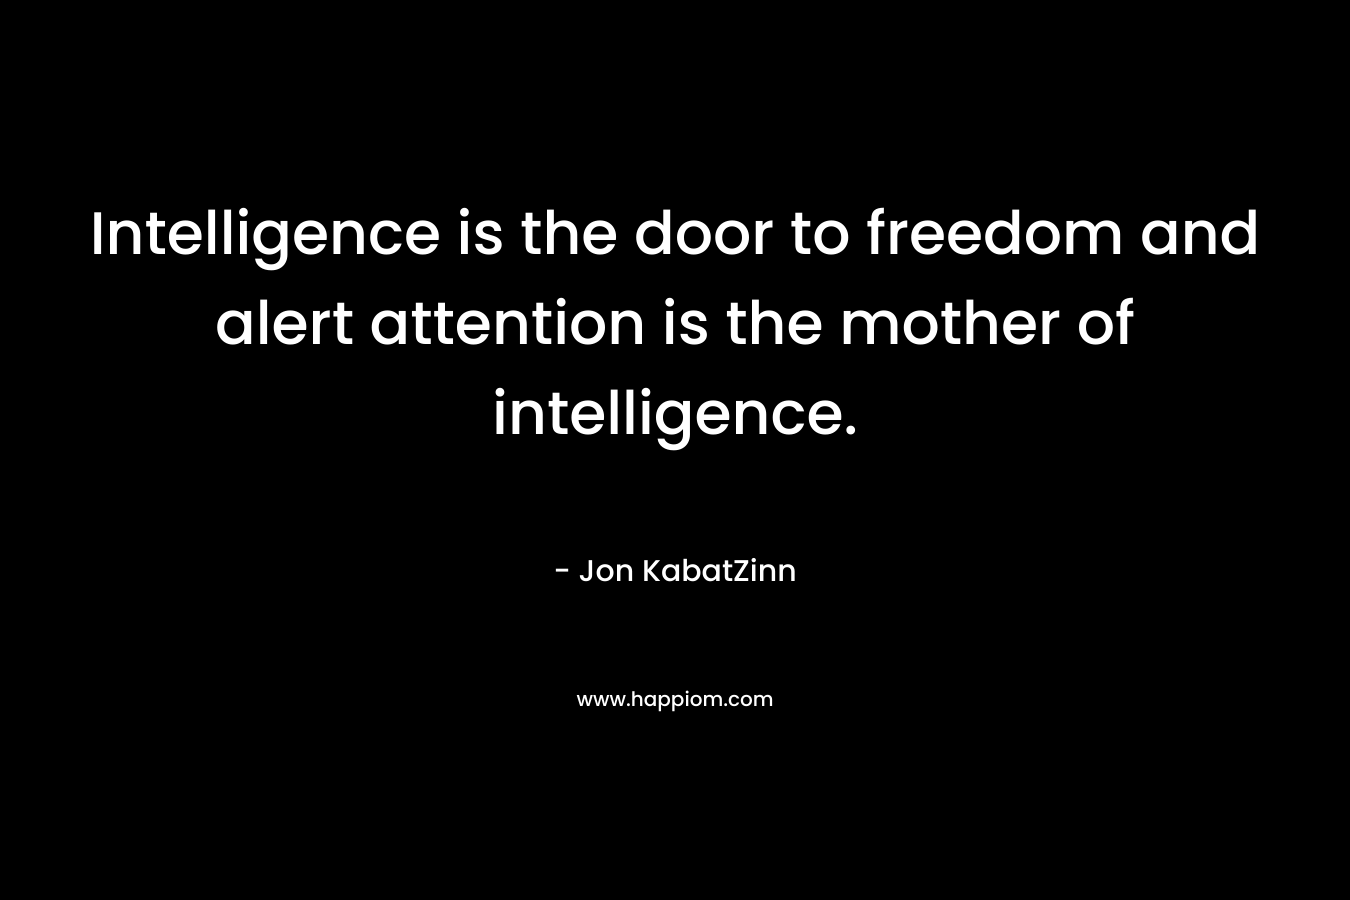 Intelligence is the door to freedom and alert attention is the mother of intelligence. – Jon KabatZinn